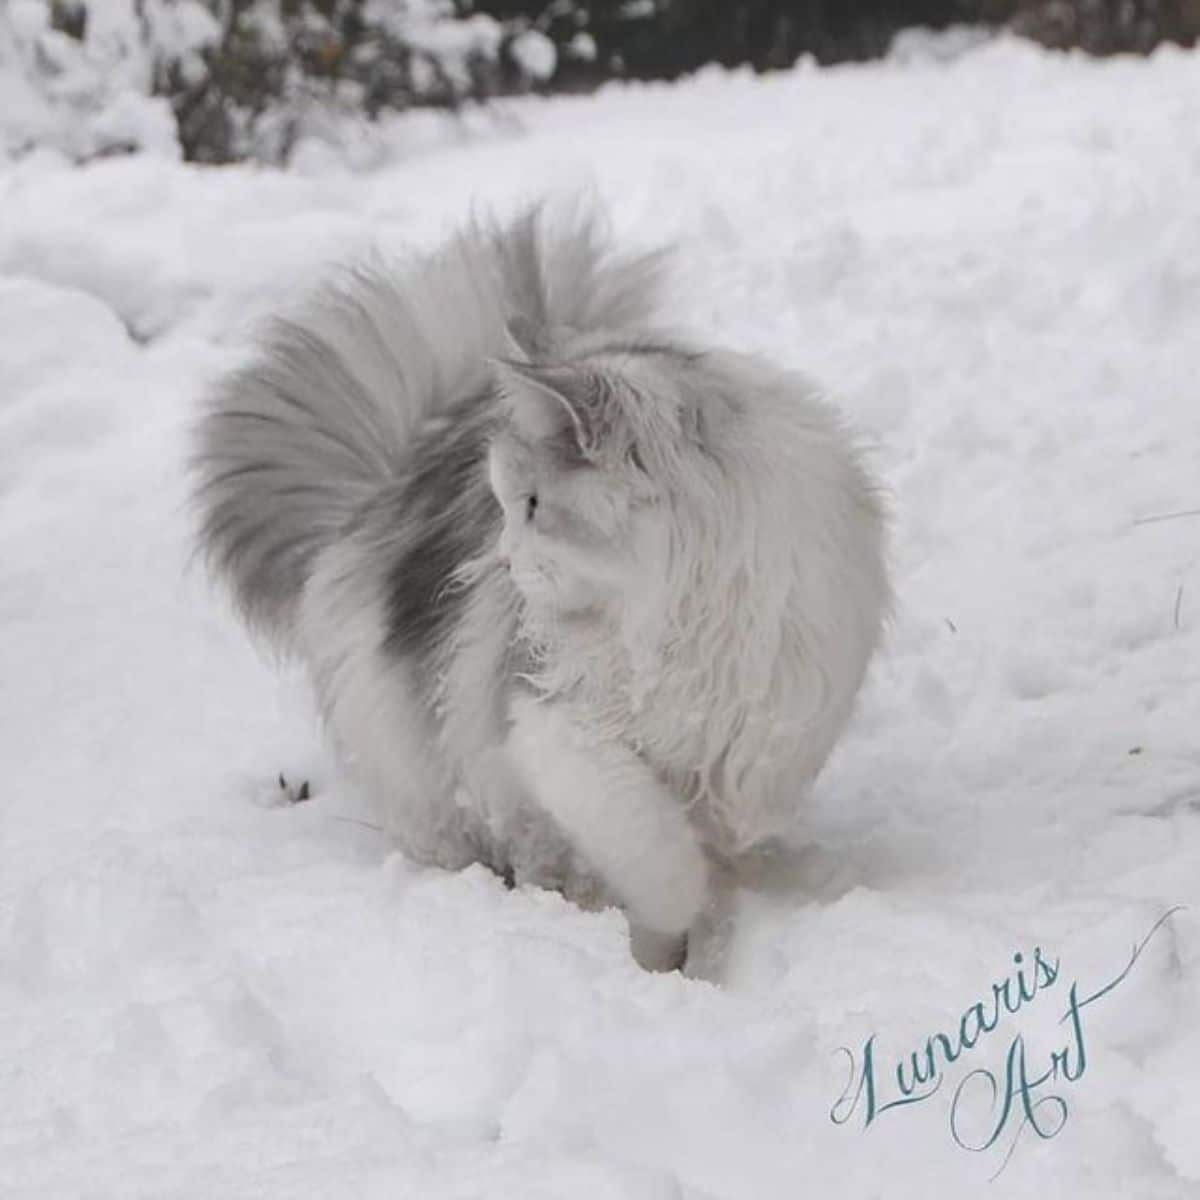 A beautiful fluffy silver maine coon walking in snow.